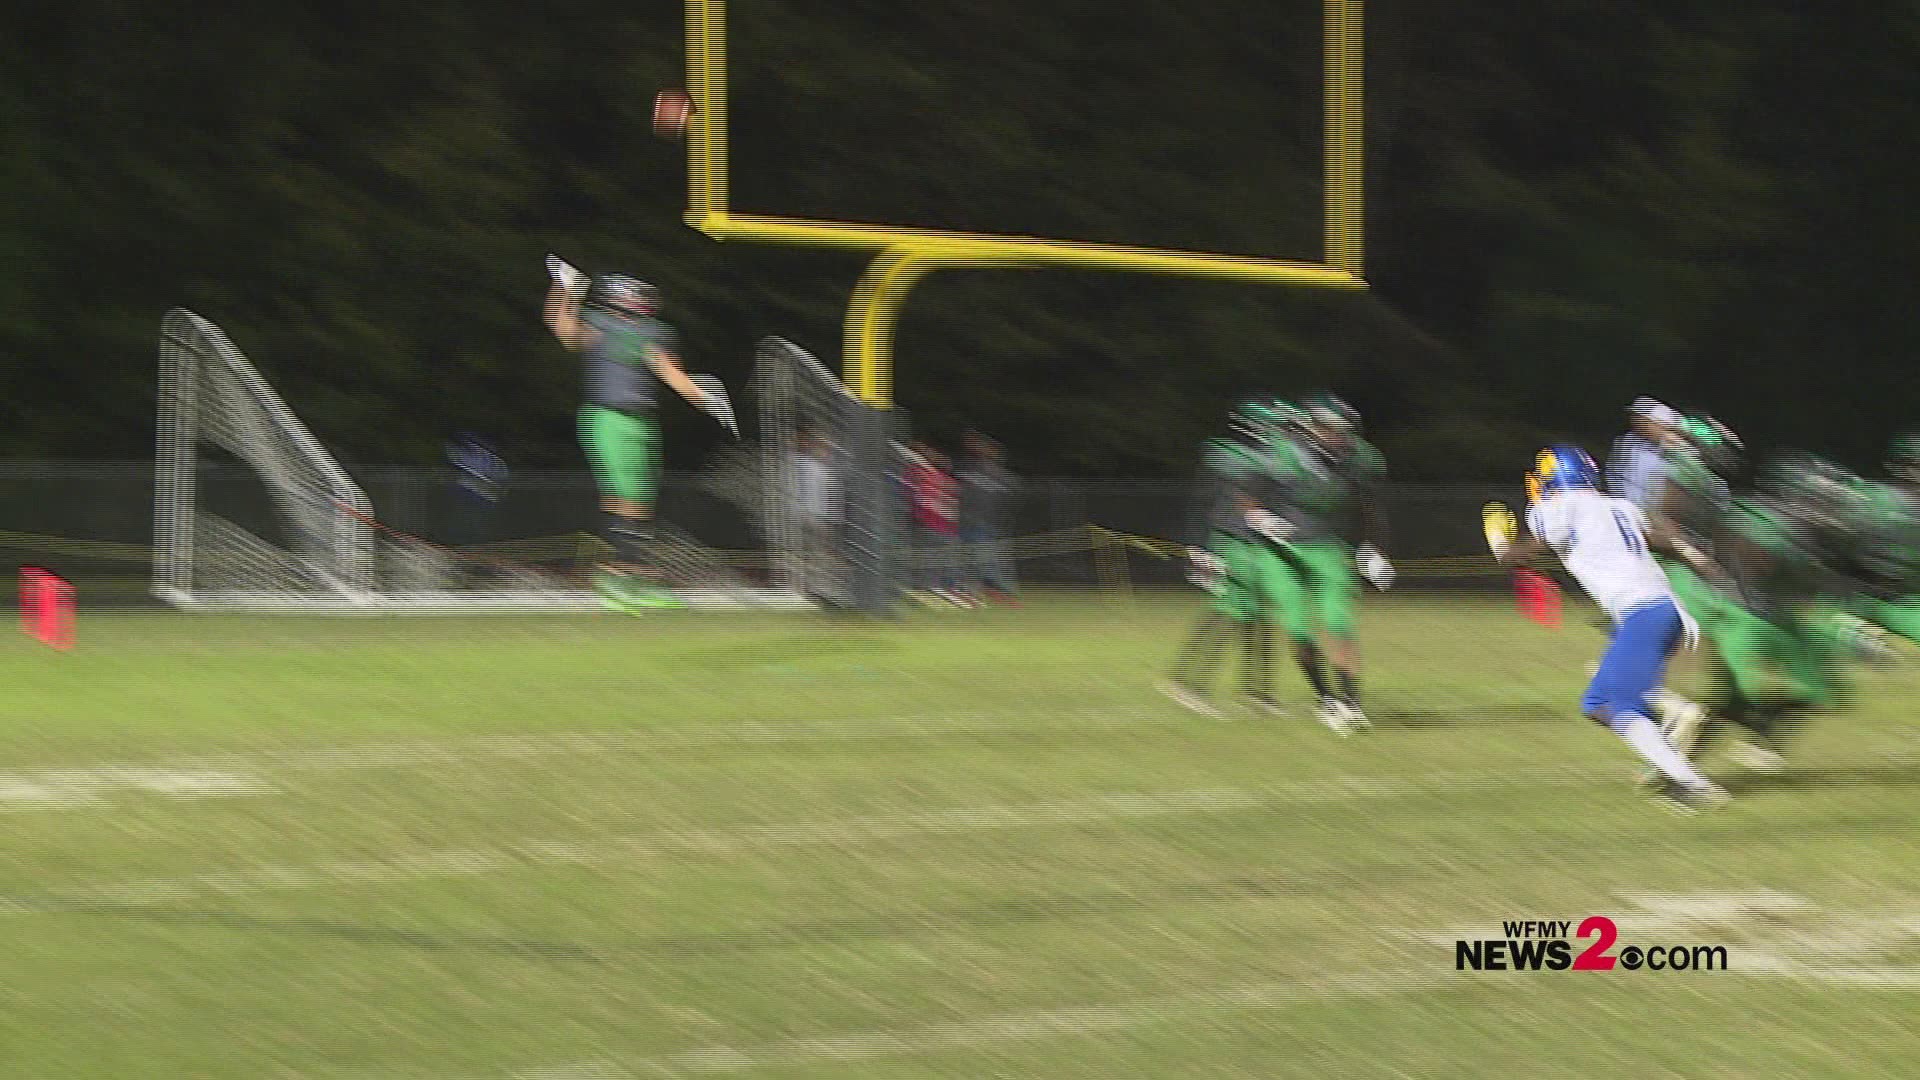 Friday Football Fever Week 11 highlights between the Dudley Panthers and the Southwest Guilford Cowboys